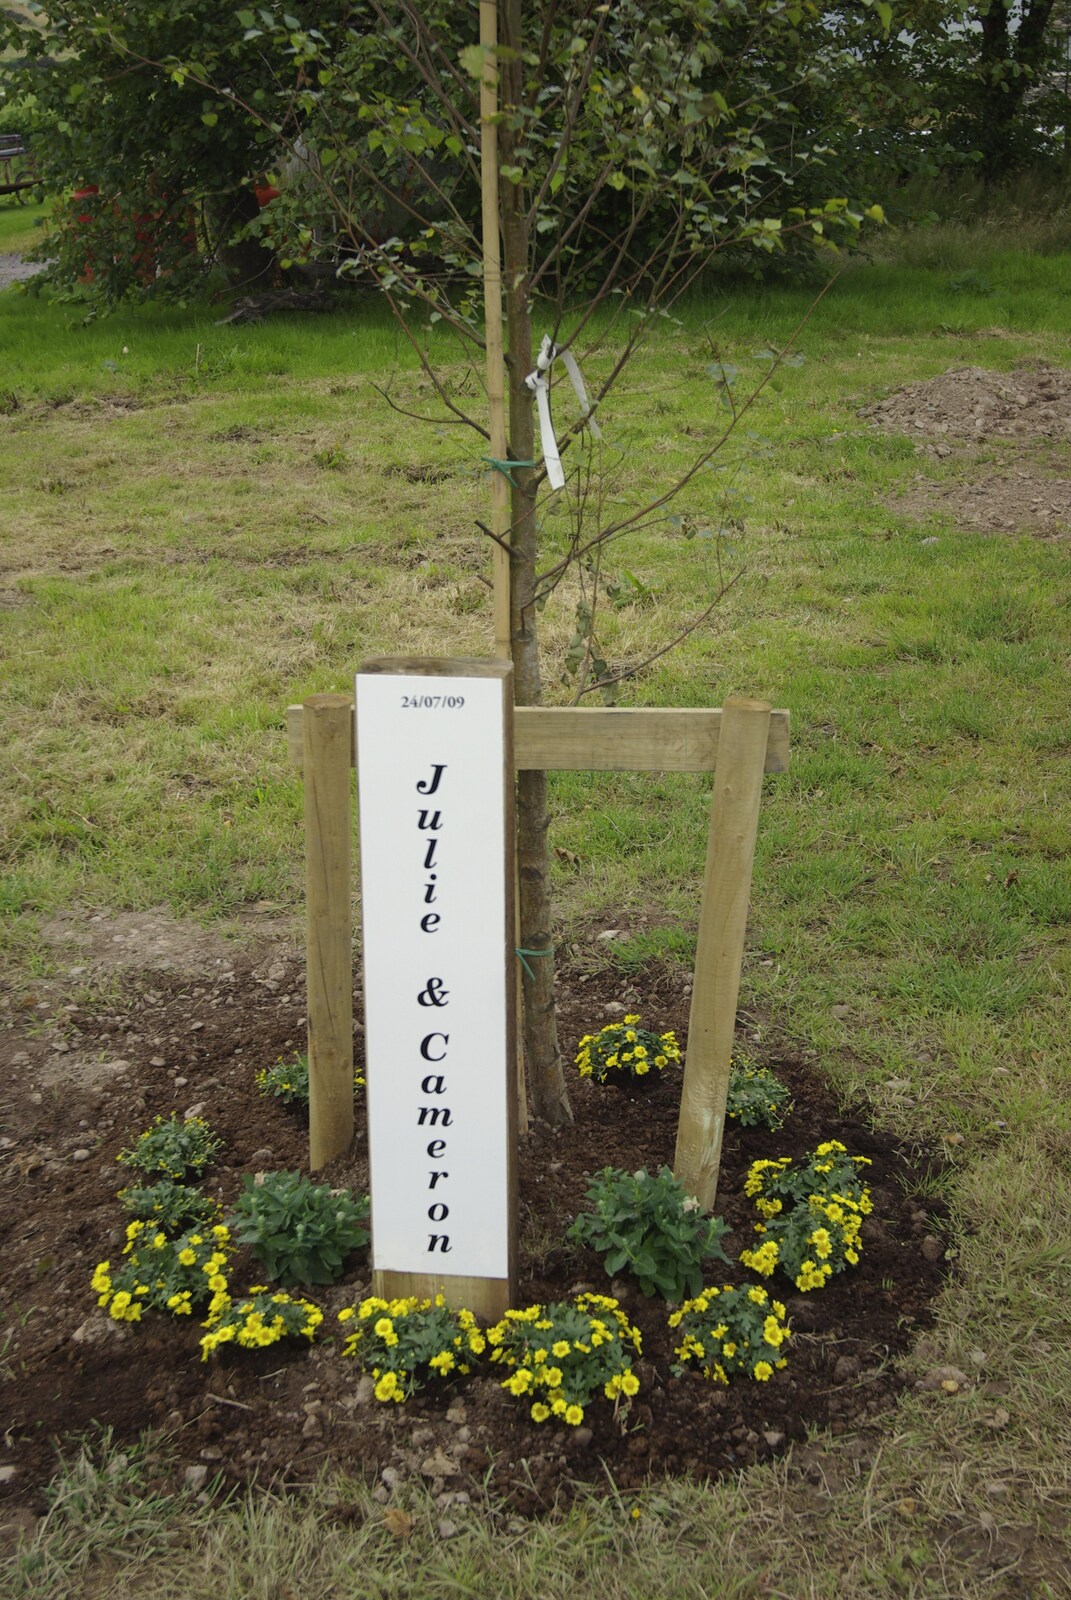 A tree is planted from Julie and Cameron's Wedding, Ballintaggart House, Dingle - 24th July 2009